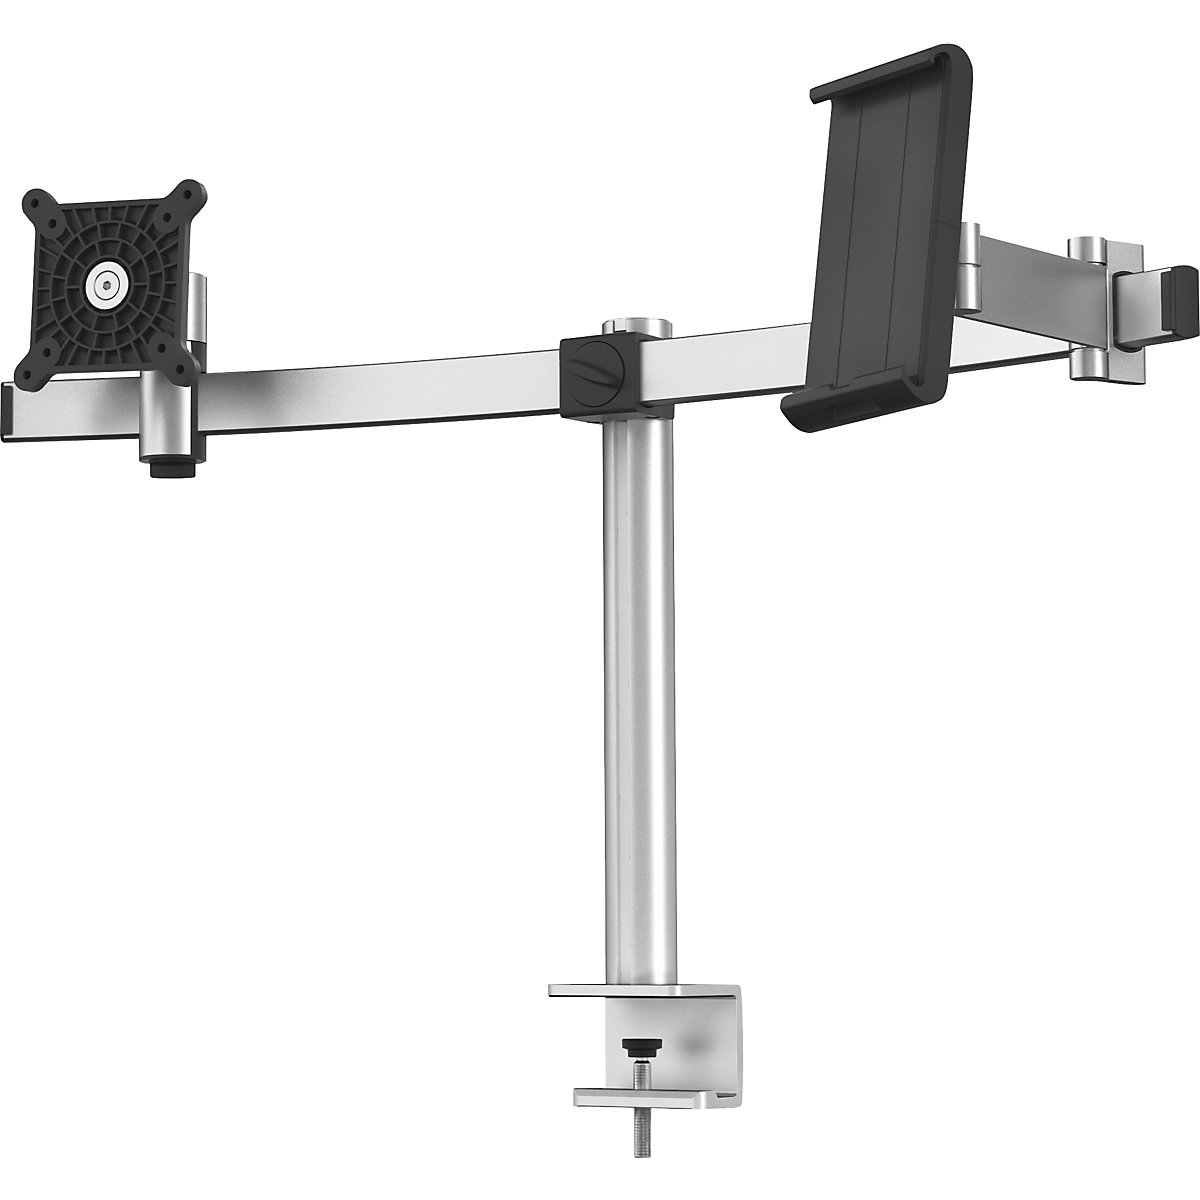 Monitor holder for 1 monitor and 1 tablet - DURABLE